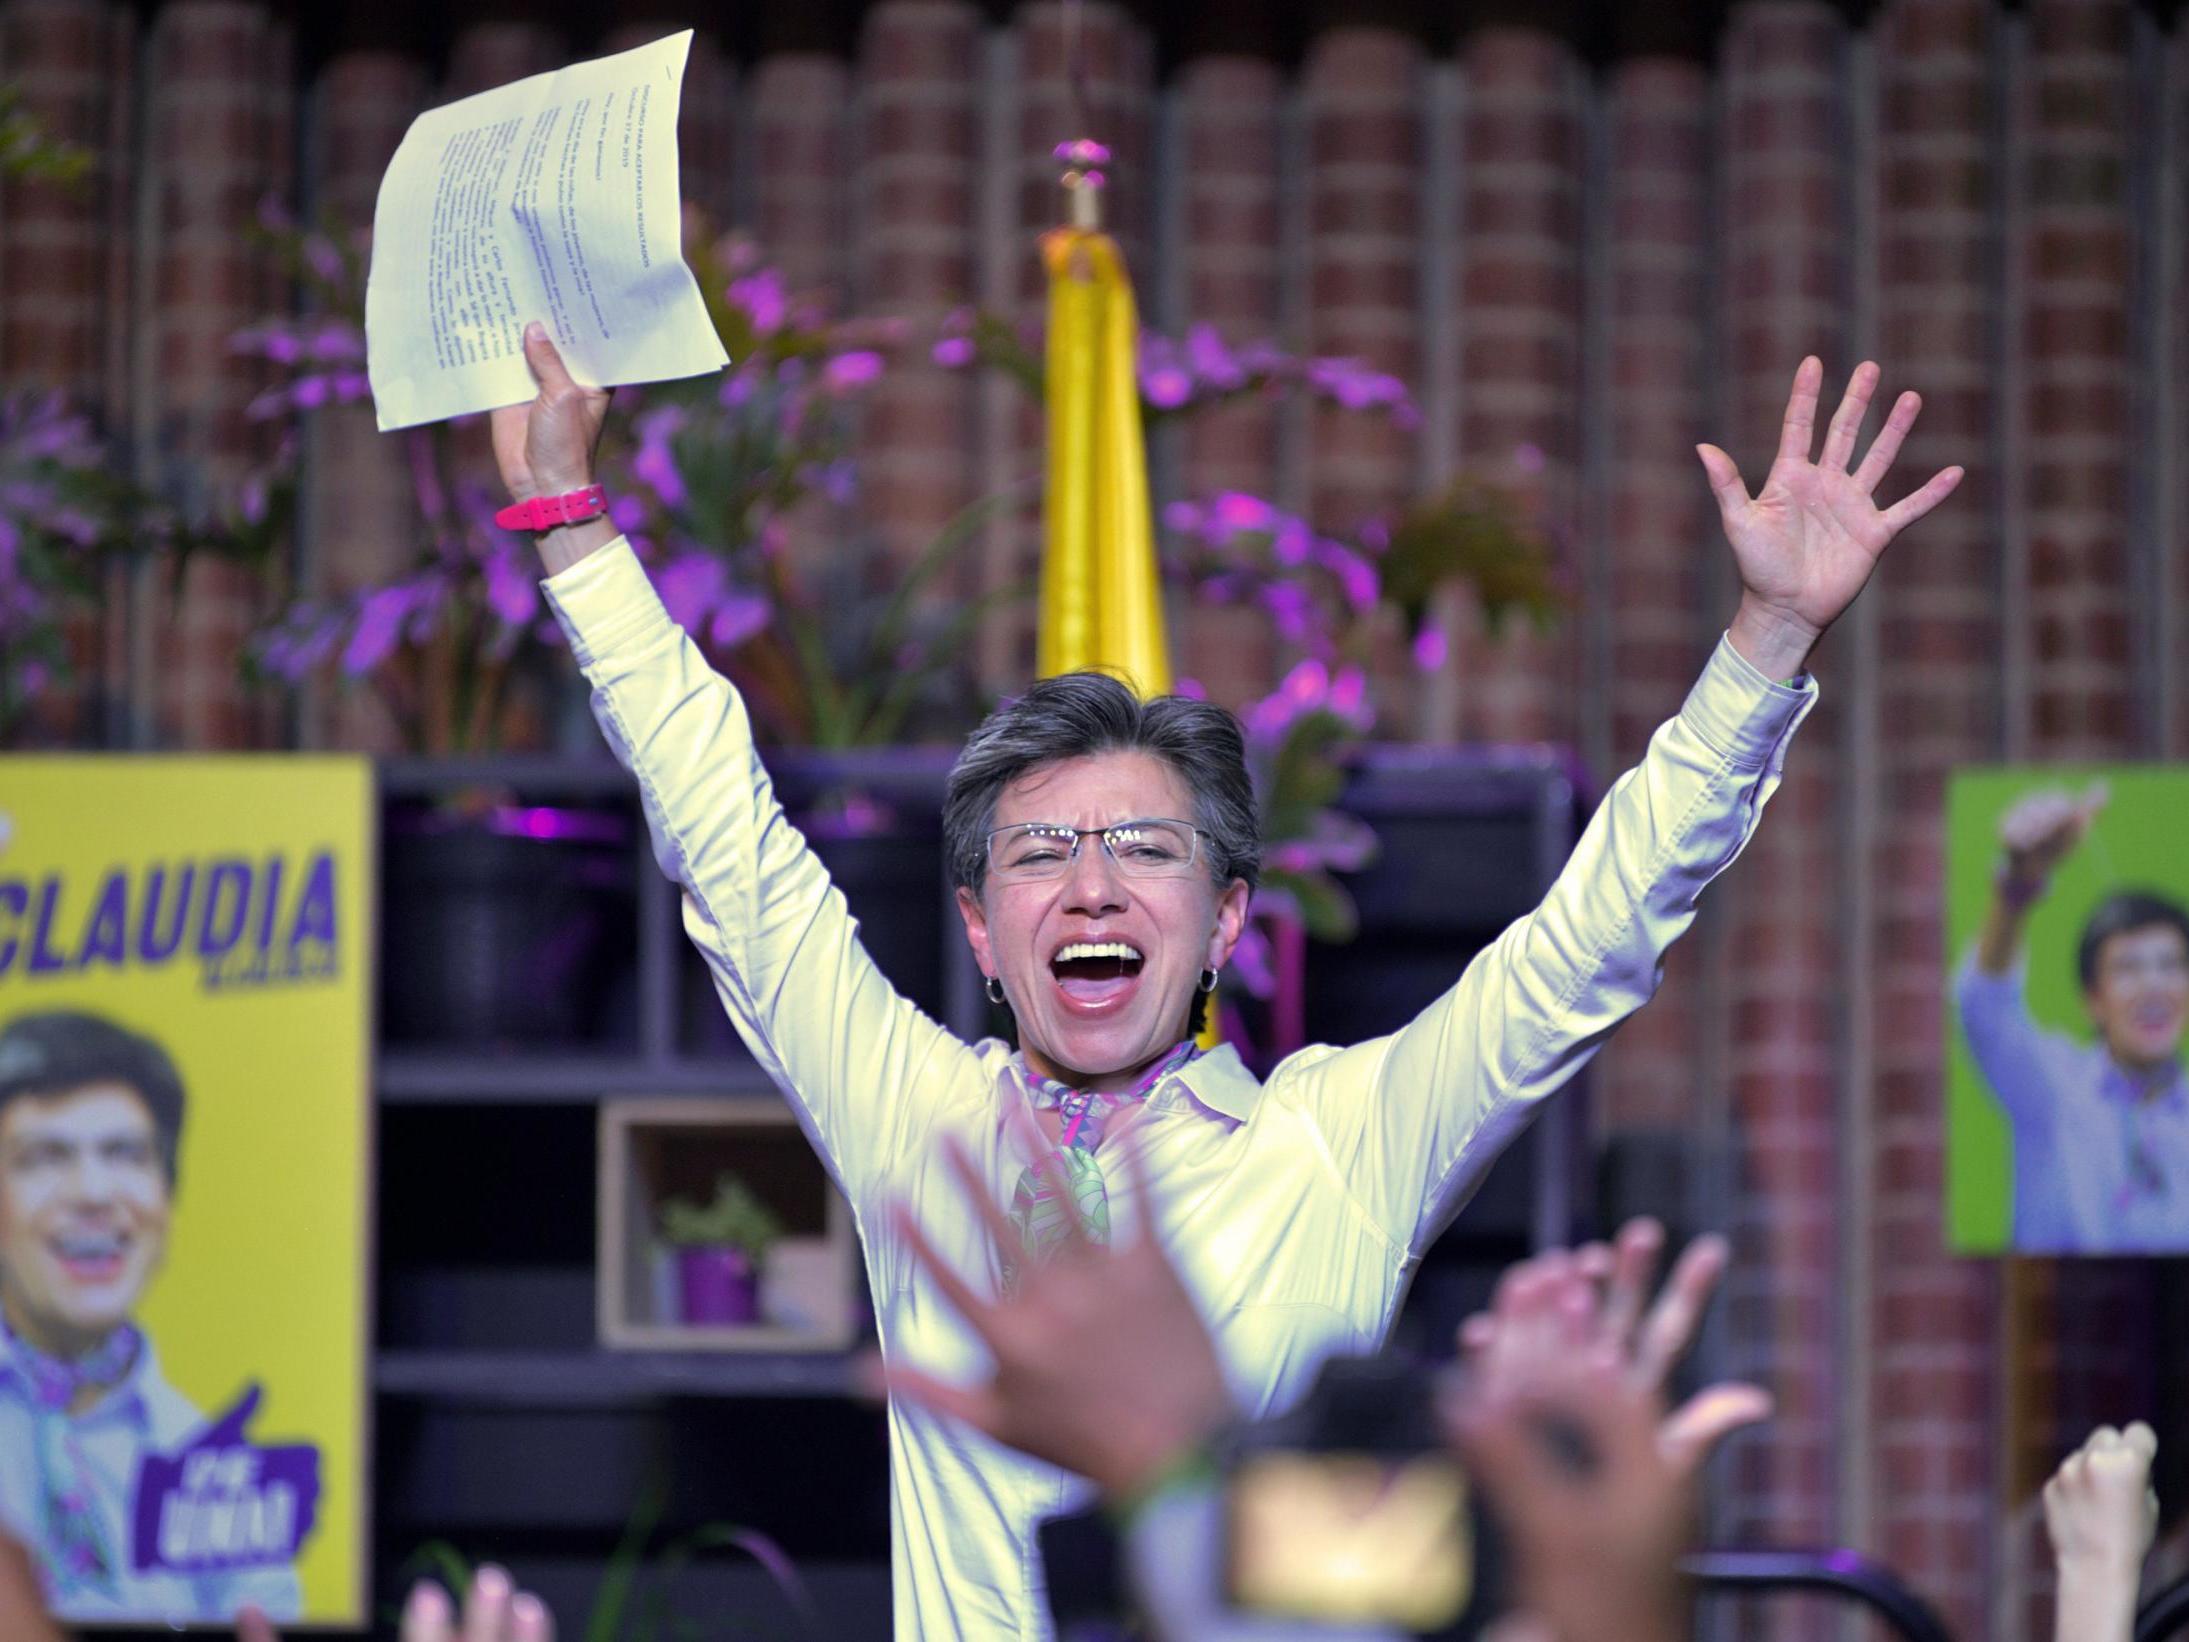 Claudia Lopez celebrates after winning during the regional elections in Bogota, Colombia, 27 October 2019